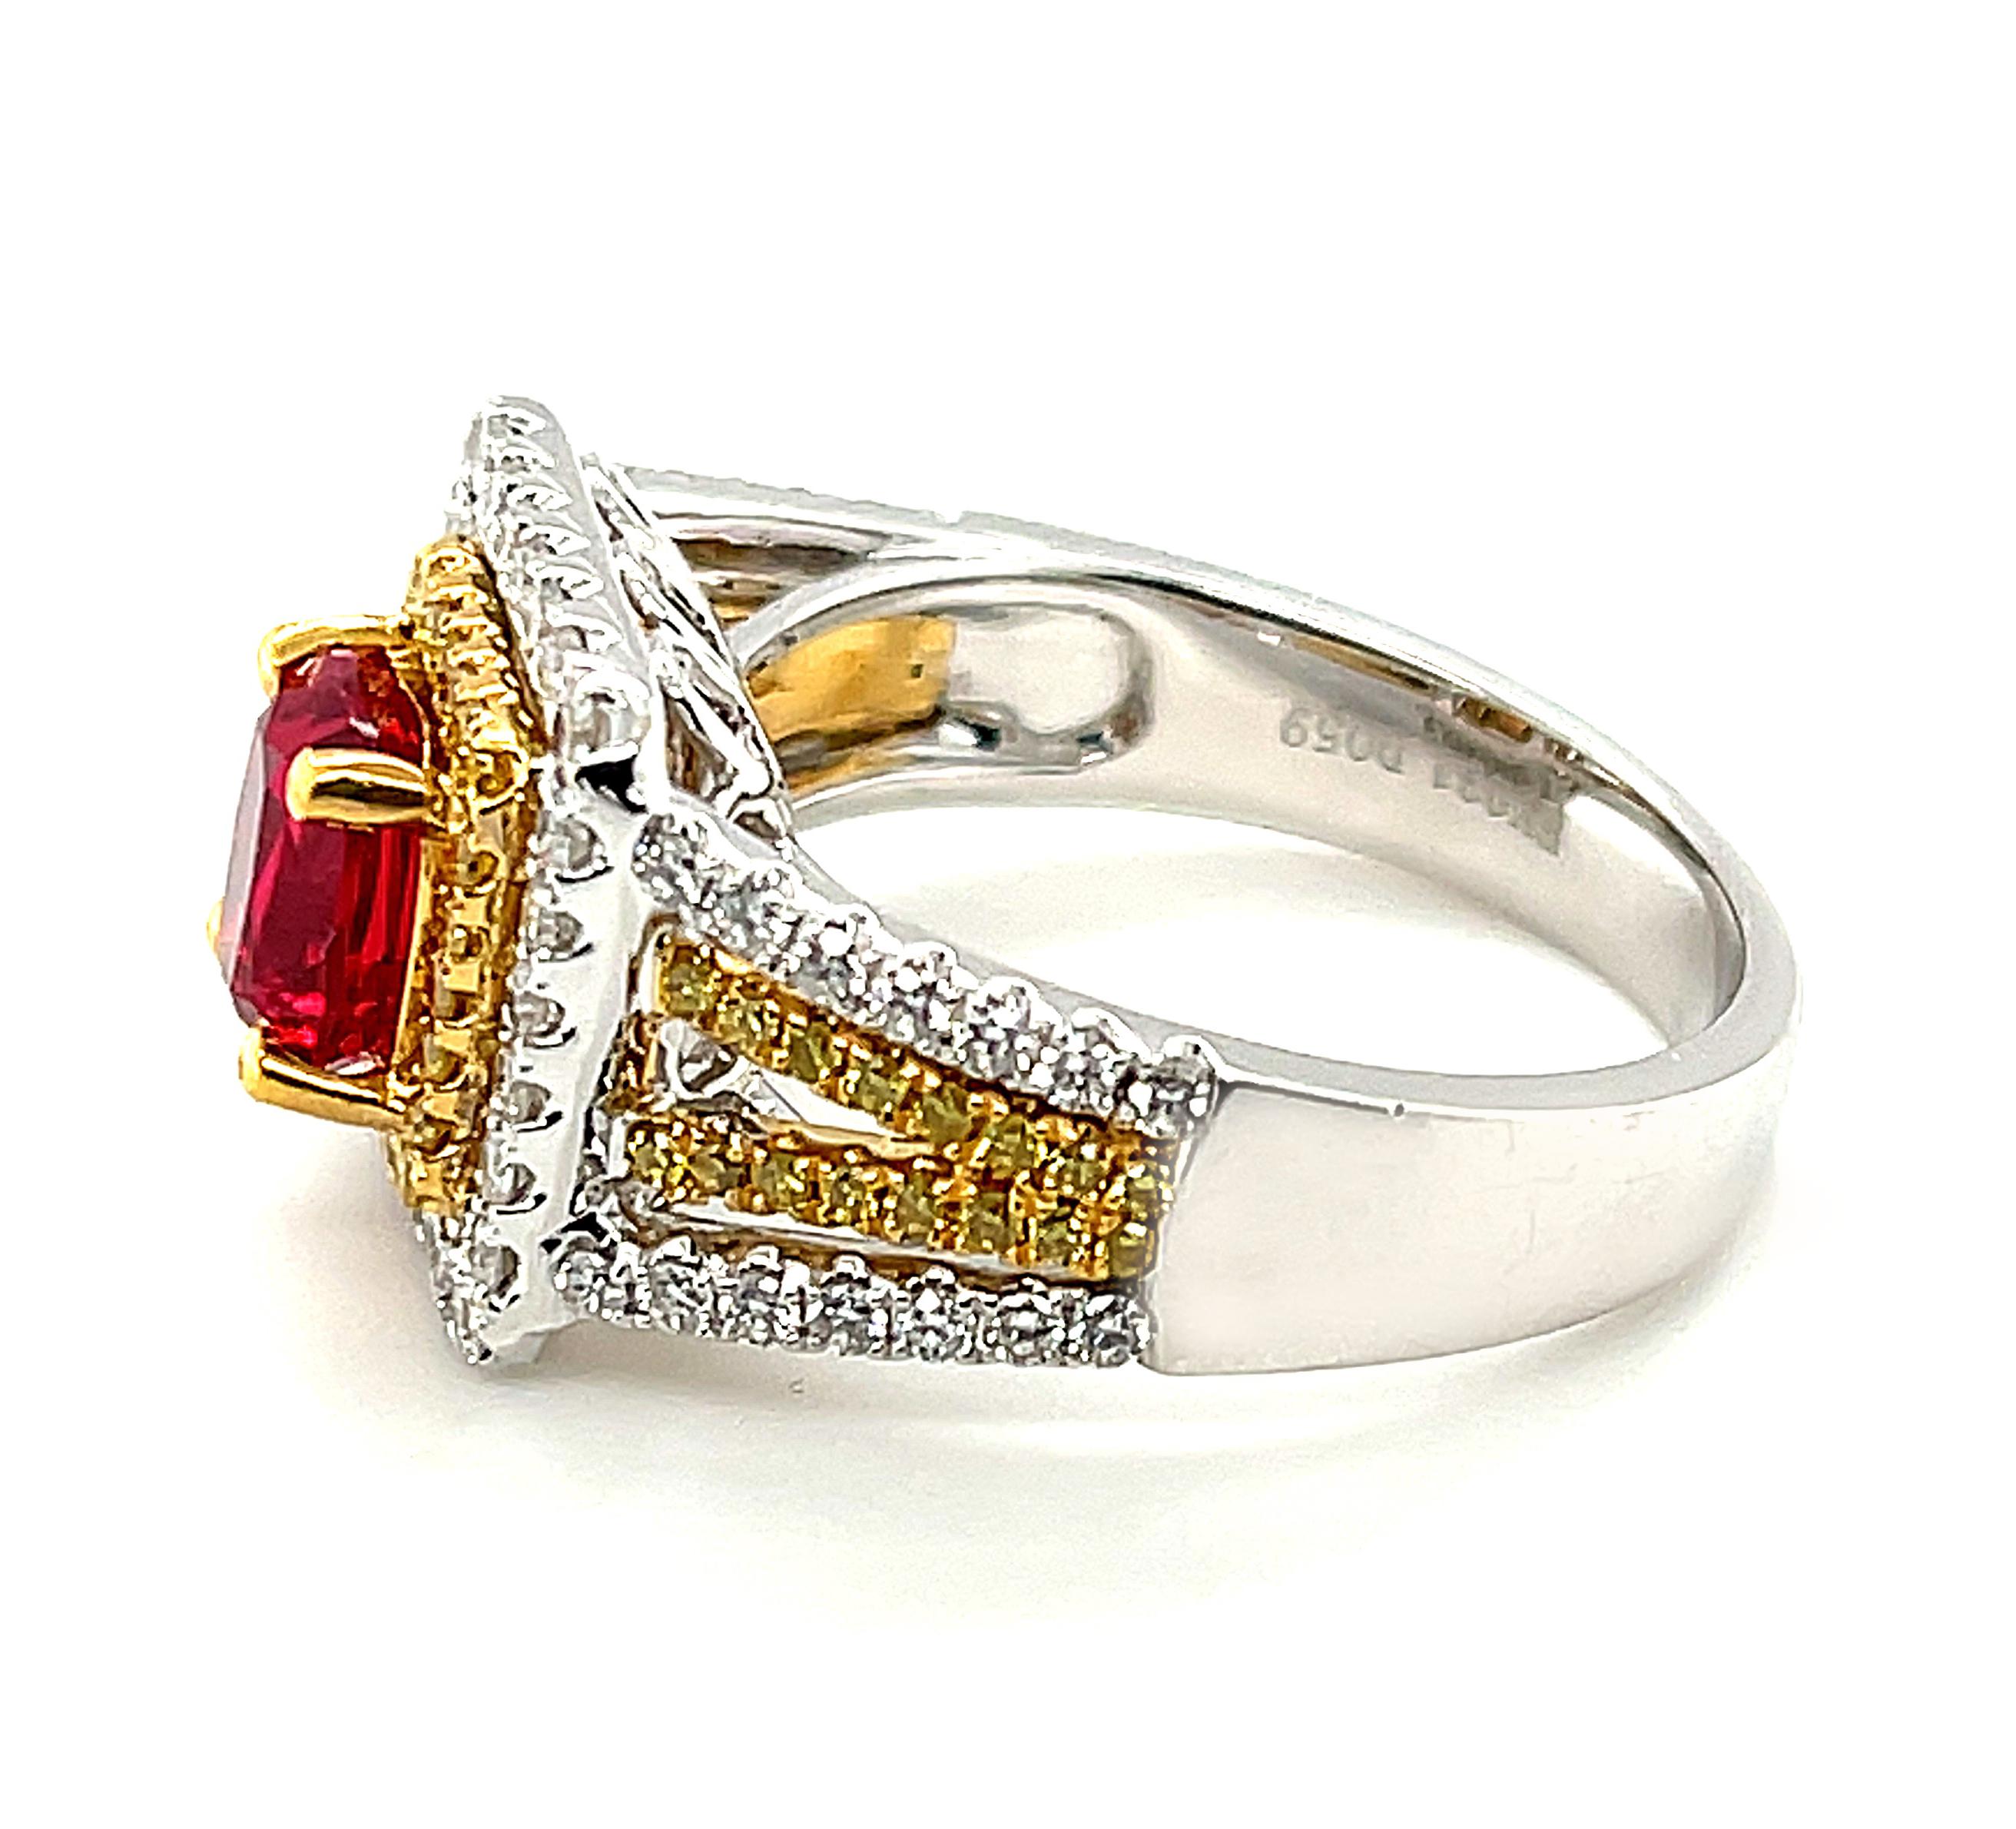 1.23 Carat Burmese Red Spinel and Diamond Cocktail Ring in Yellow and White Gold For Sale 3